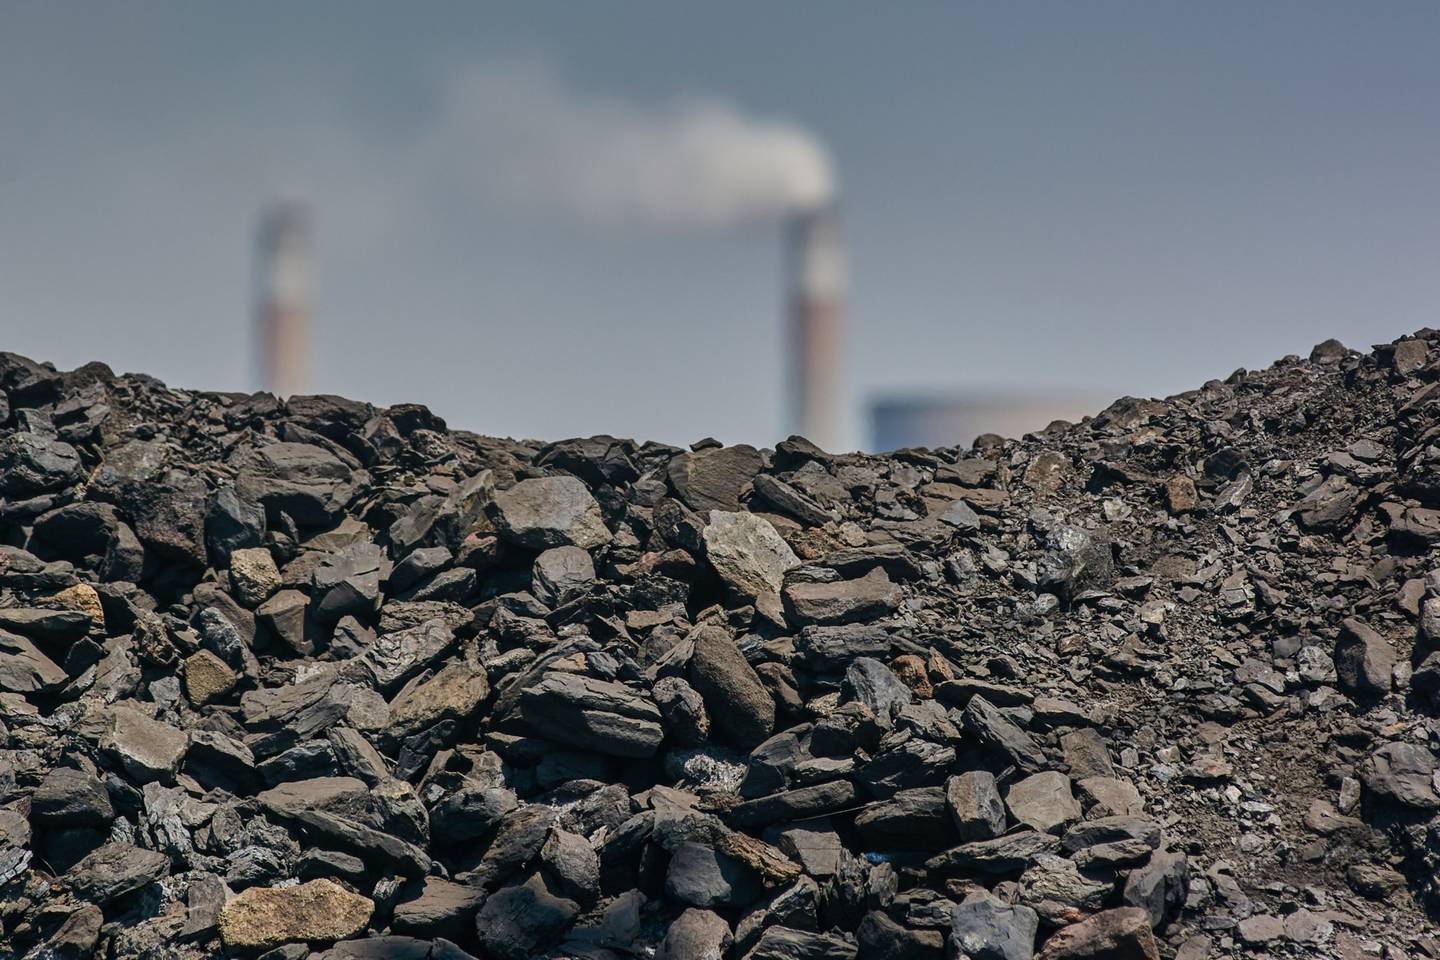 A coal pile in front of the towers of the Eskom Holdings SOC Ltd. Kendal coal-fired power station in Mpumalanga, South Africa, on Friday, Oct. 15, 2021.